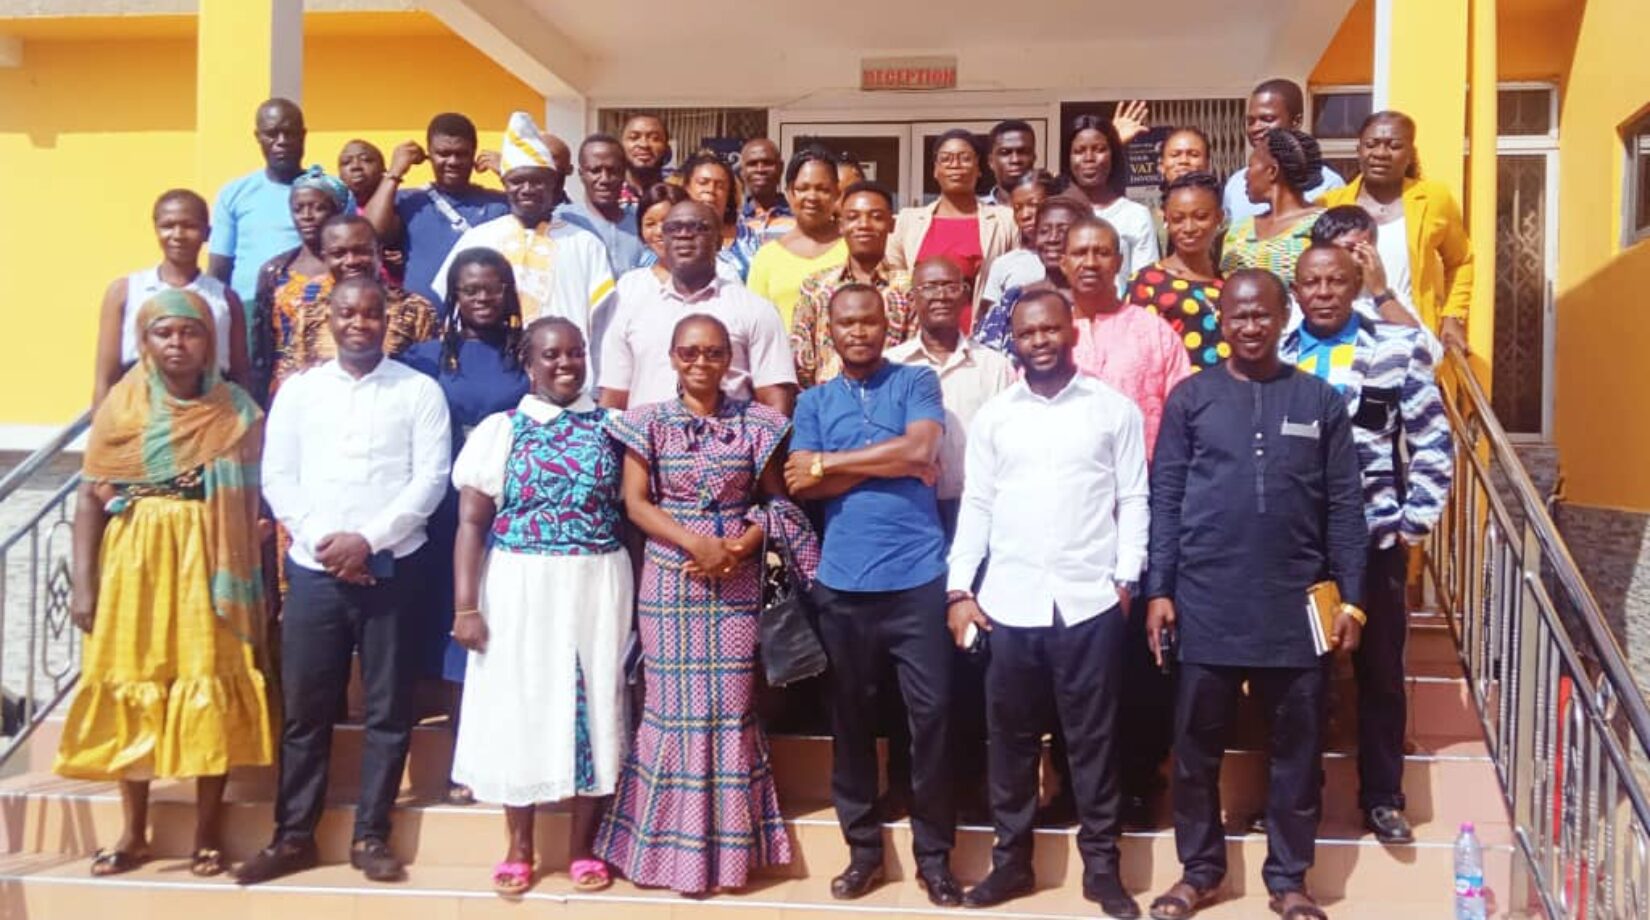 GHANESCA Holds Workshop For Member Organizations and Urges Them To Take Advantage Of Digital Technology.